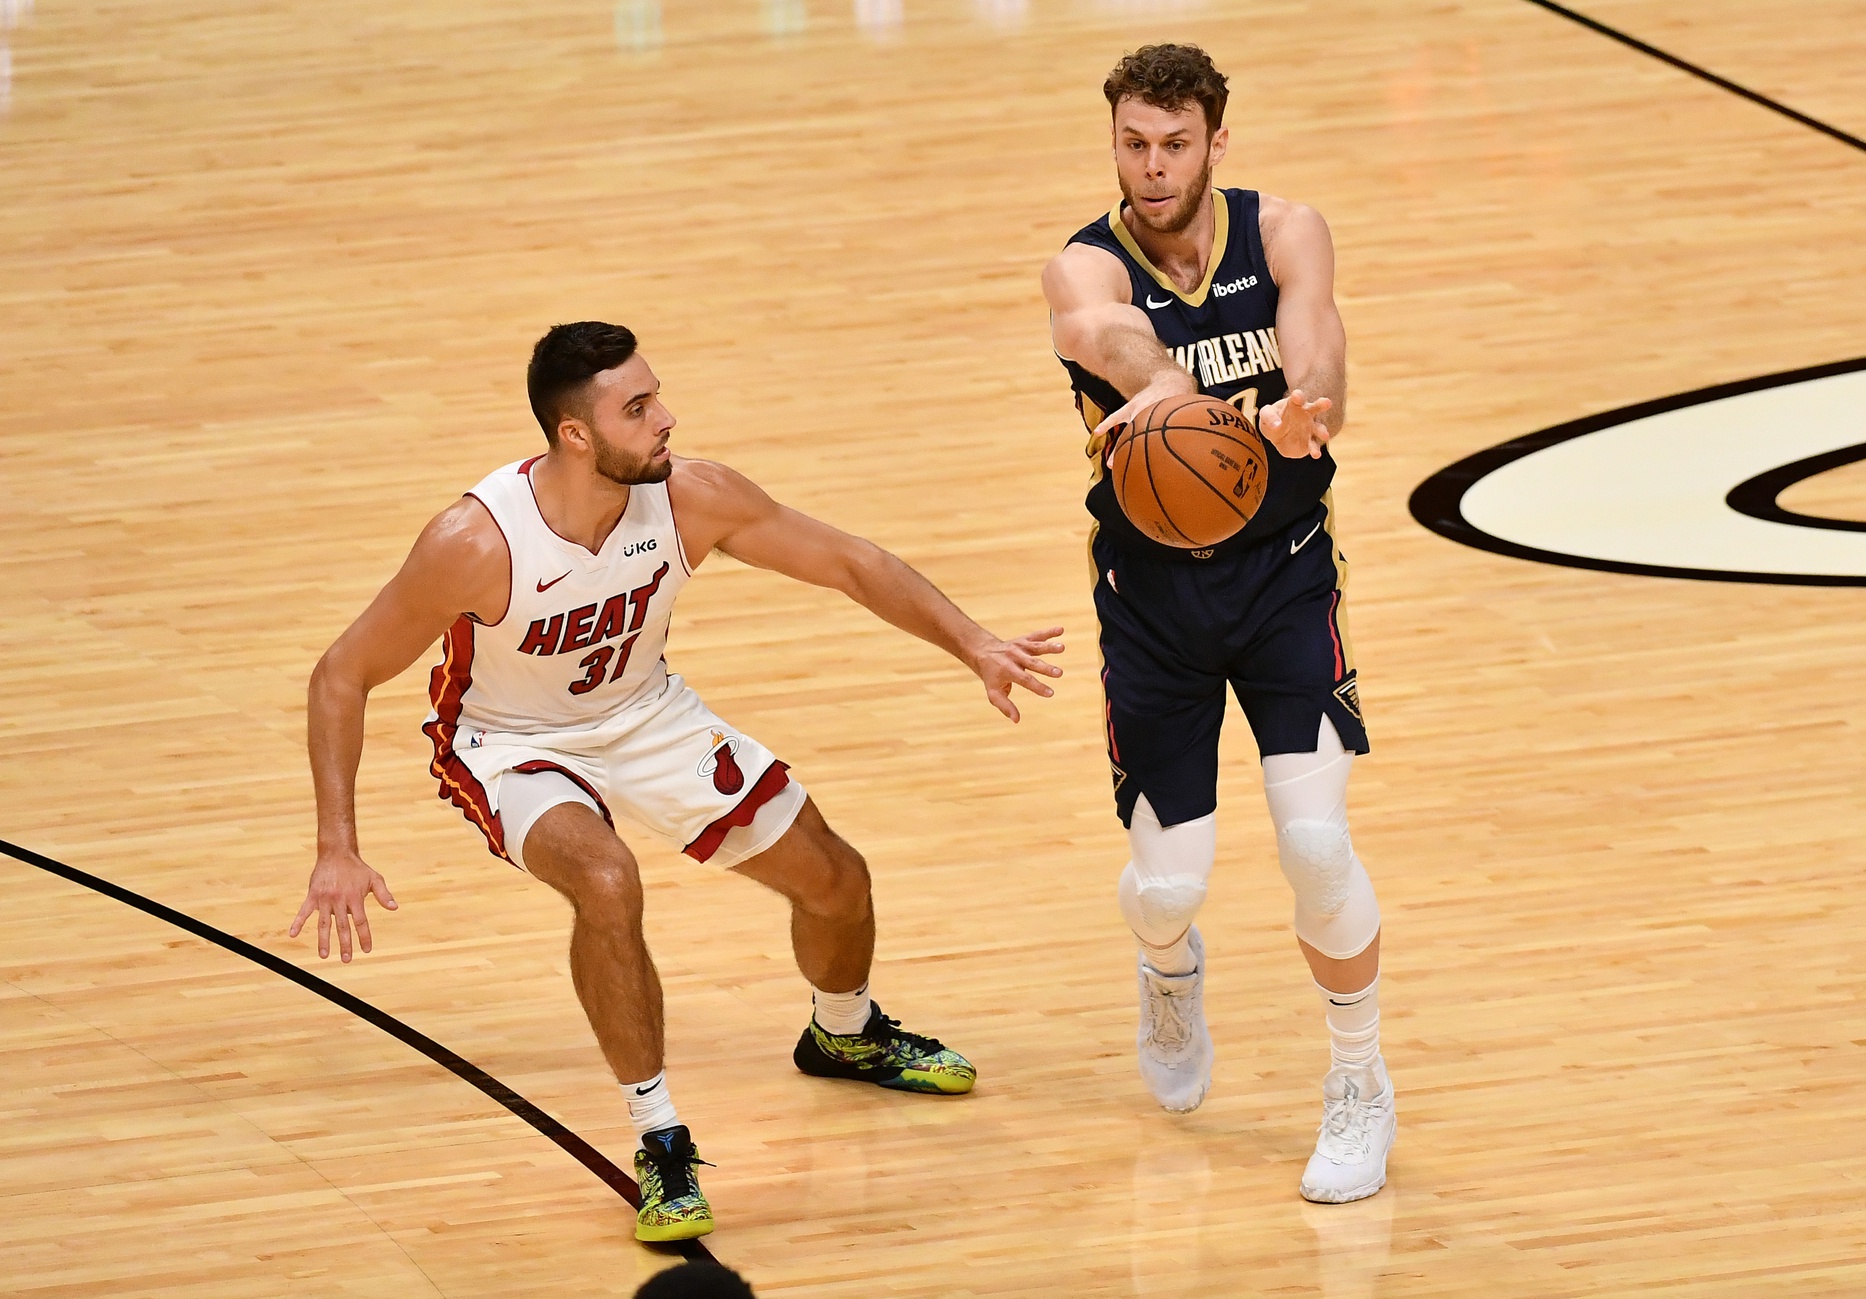 Keeping the fire burning: Miami Heat's Max Strus seeks to build on